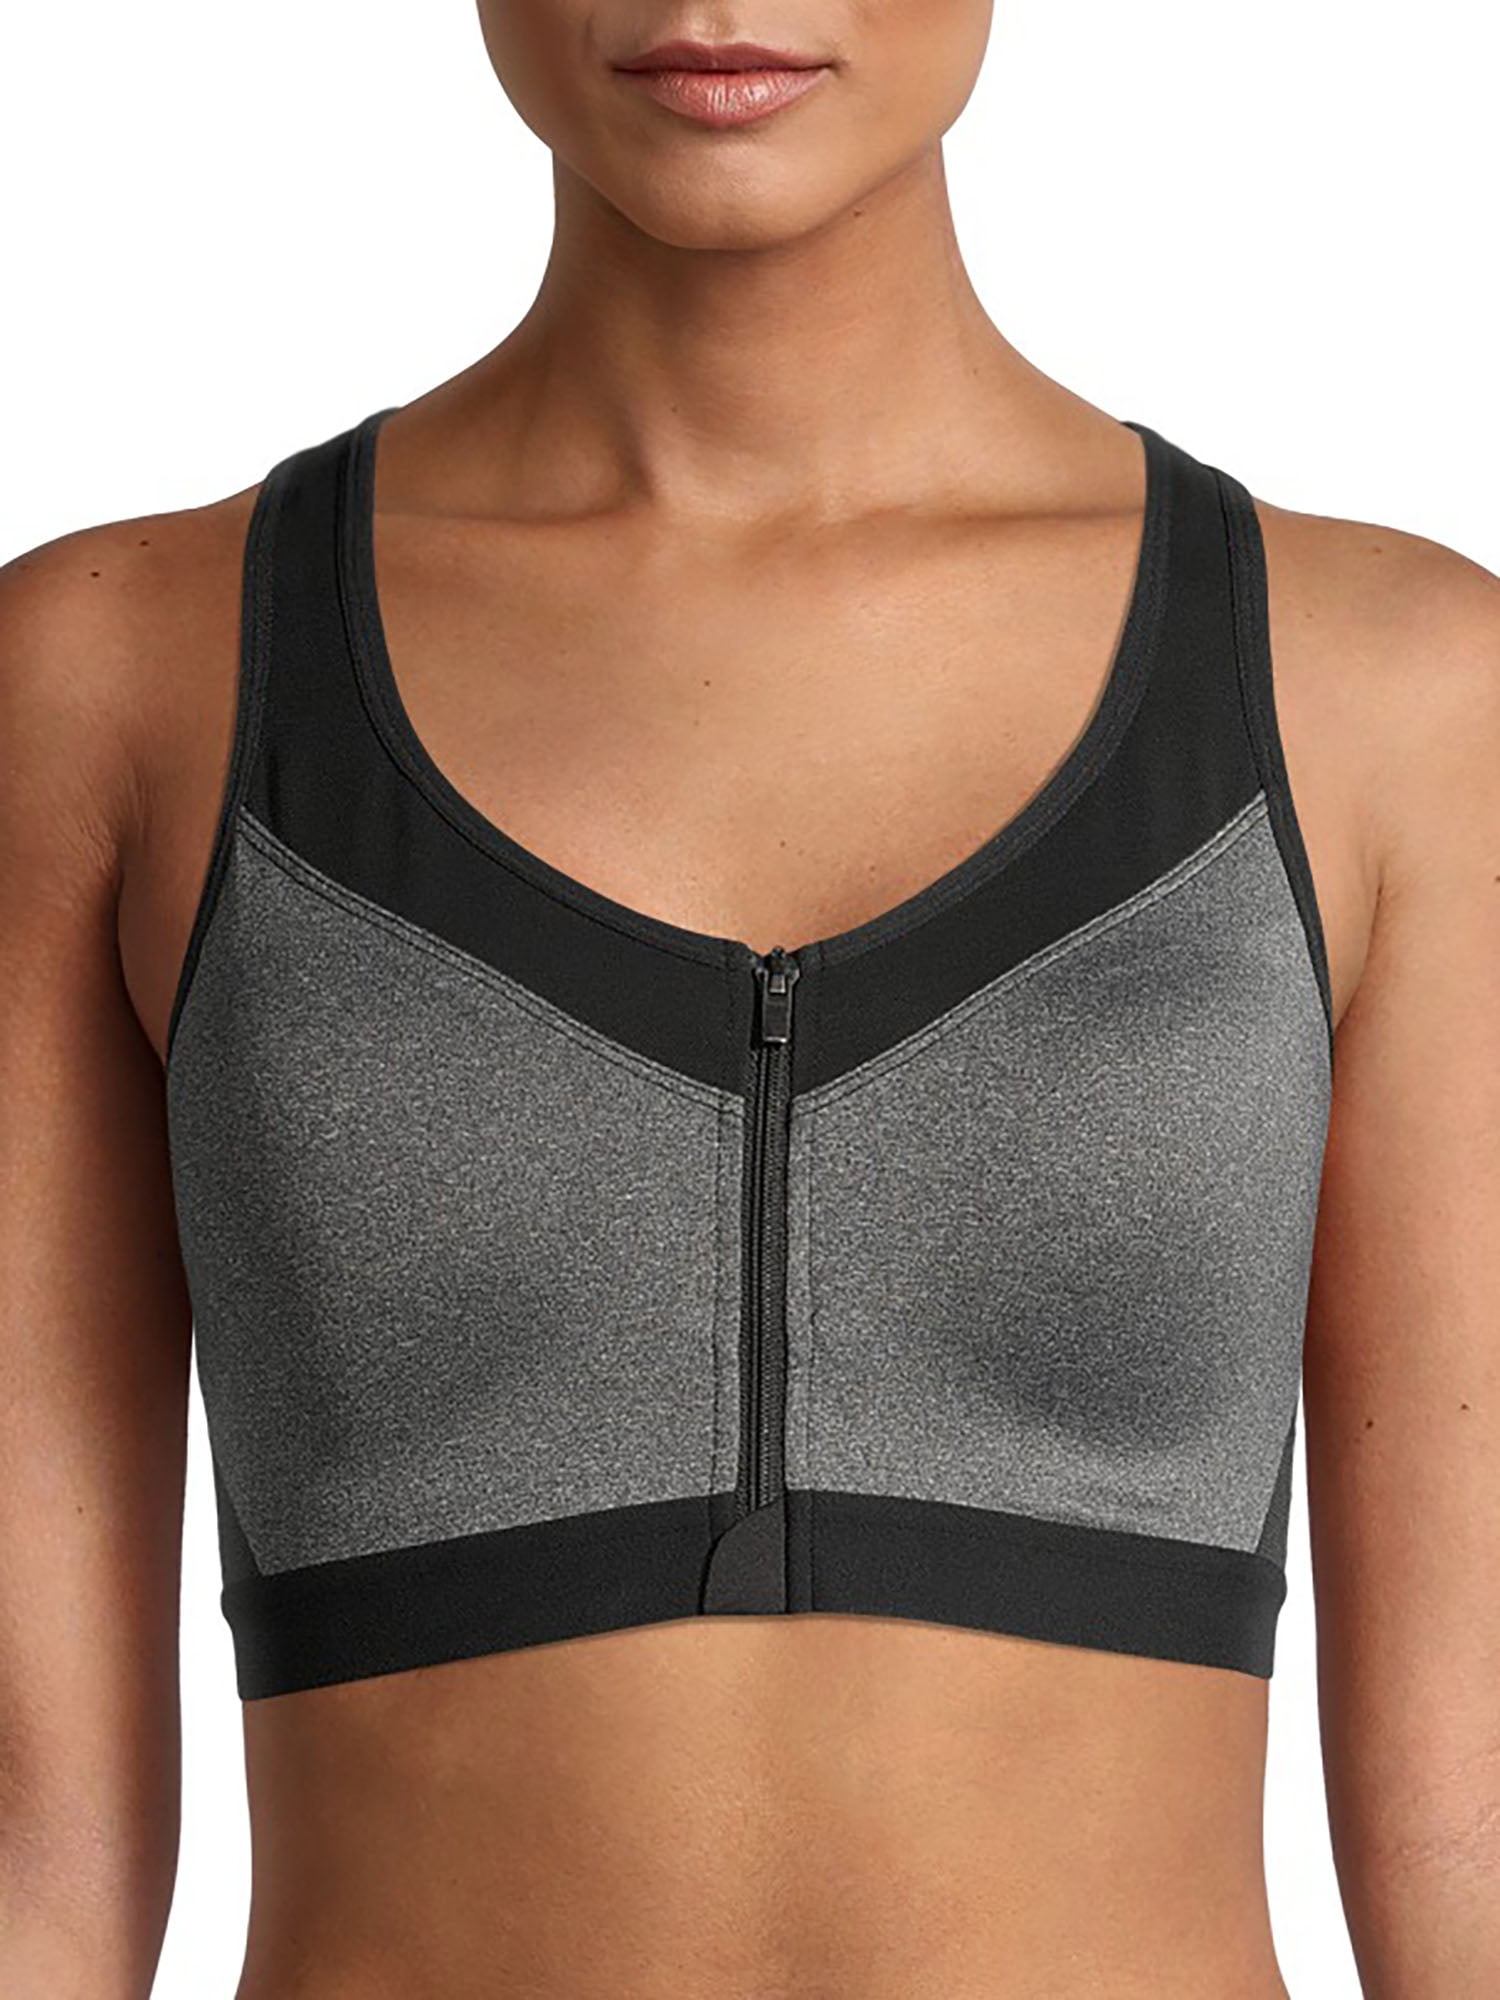 Avia  Women's Active Printed Sports Bra with Strappy Back 